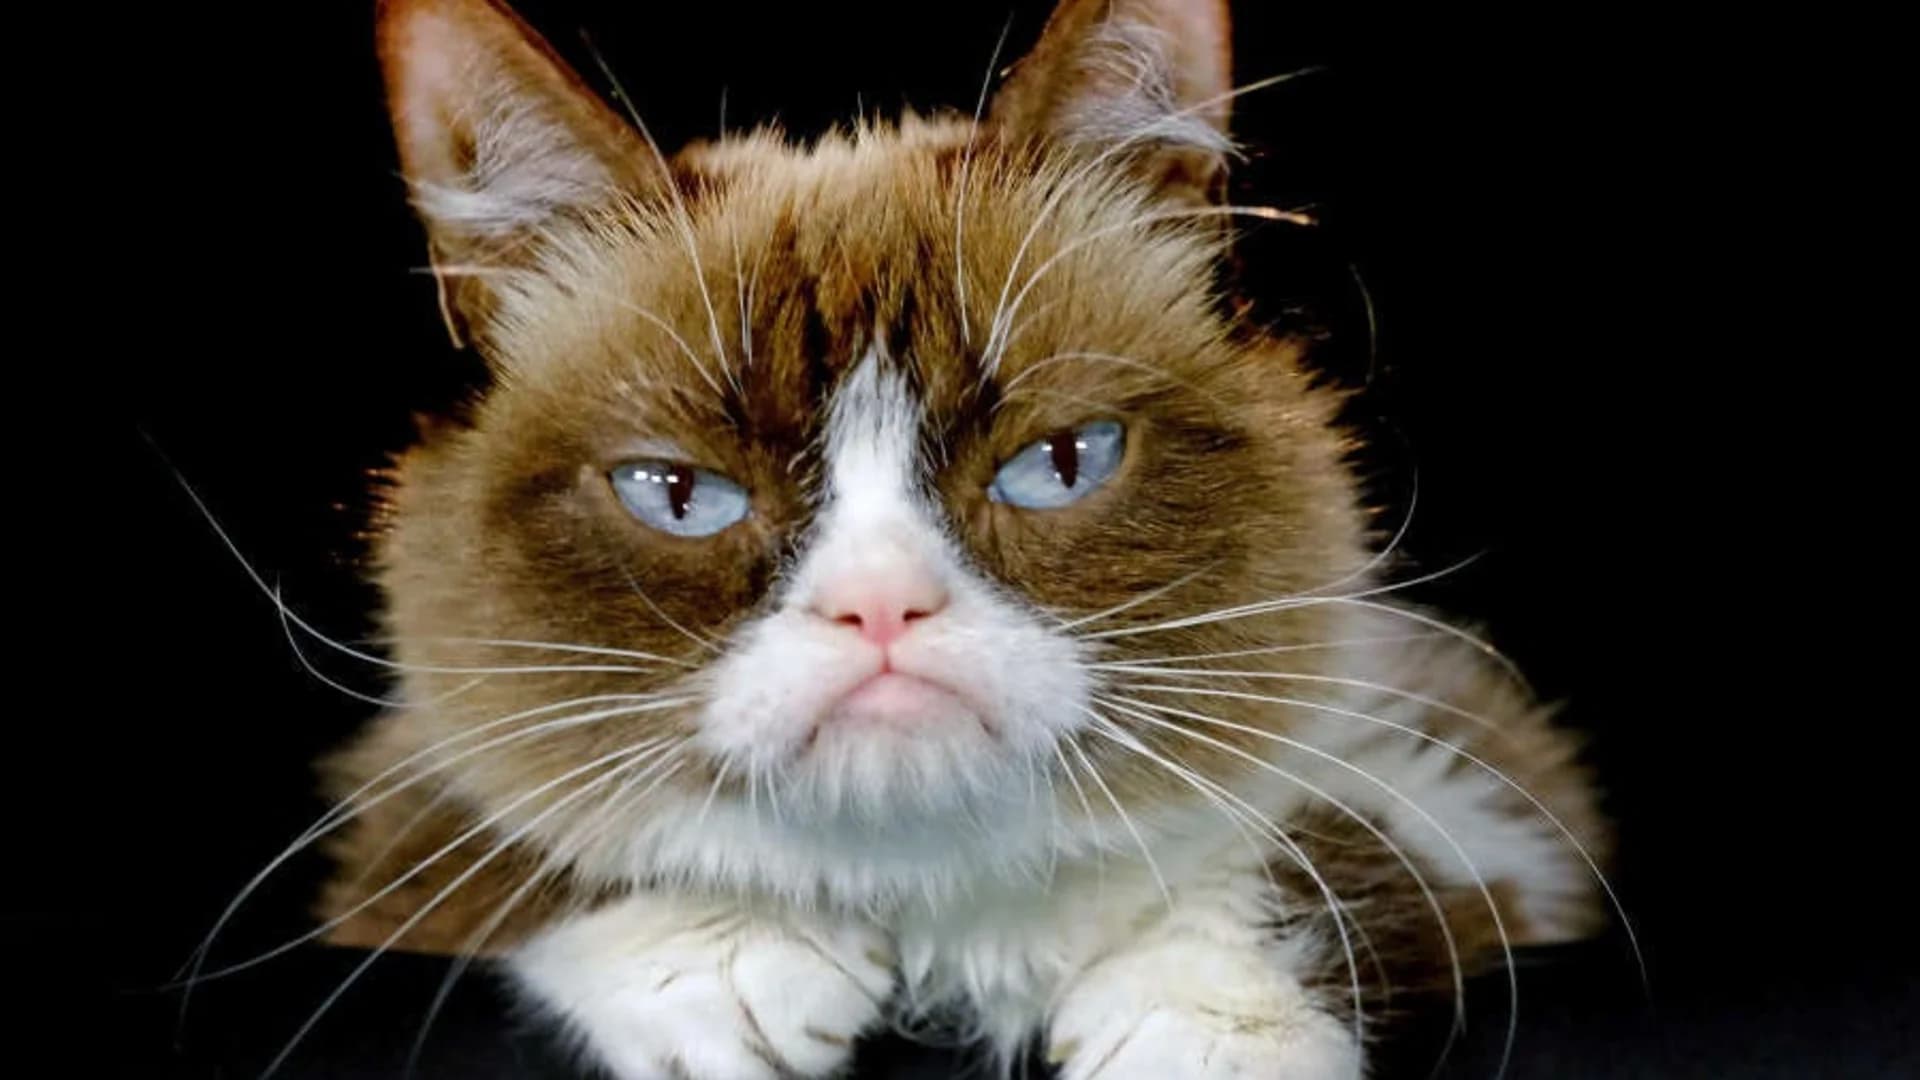 'Some days are grumpier than others.' Grumpy Cat dies